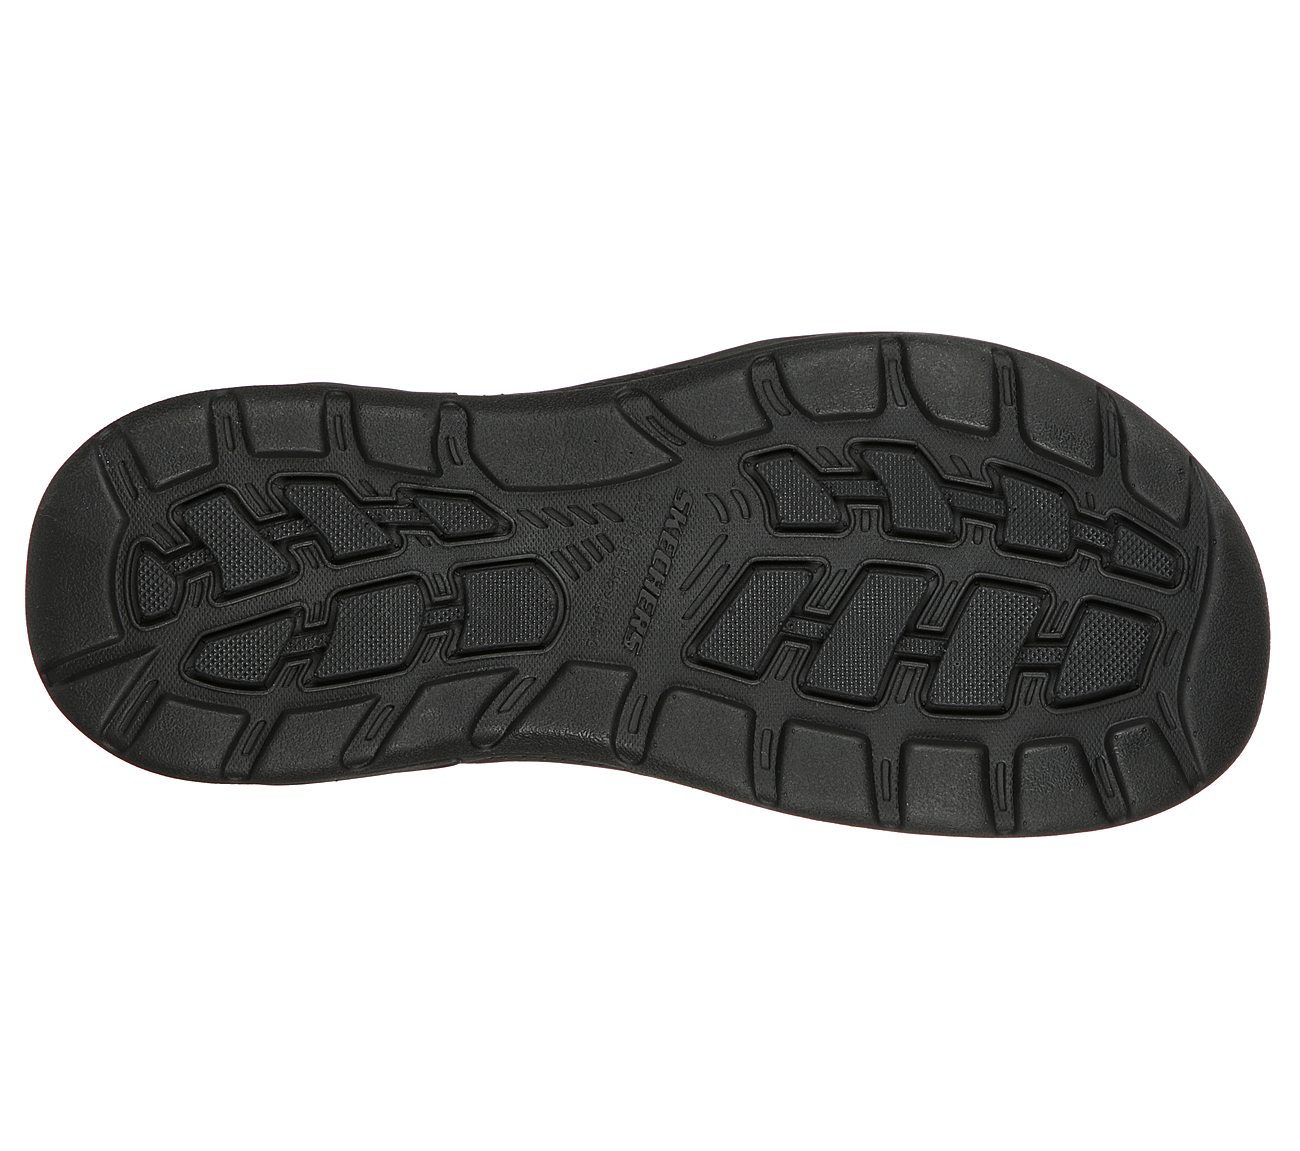 ARCH FIT MOTLEY SD - REVELO, BBBBLACK Footwear Bottom View